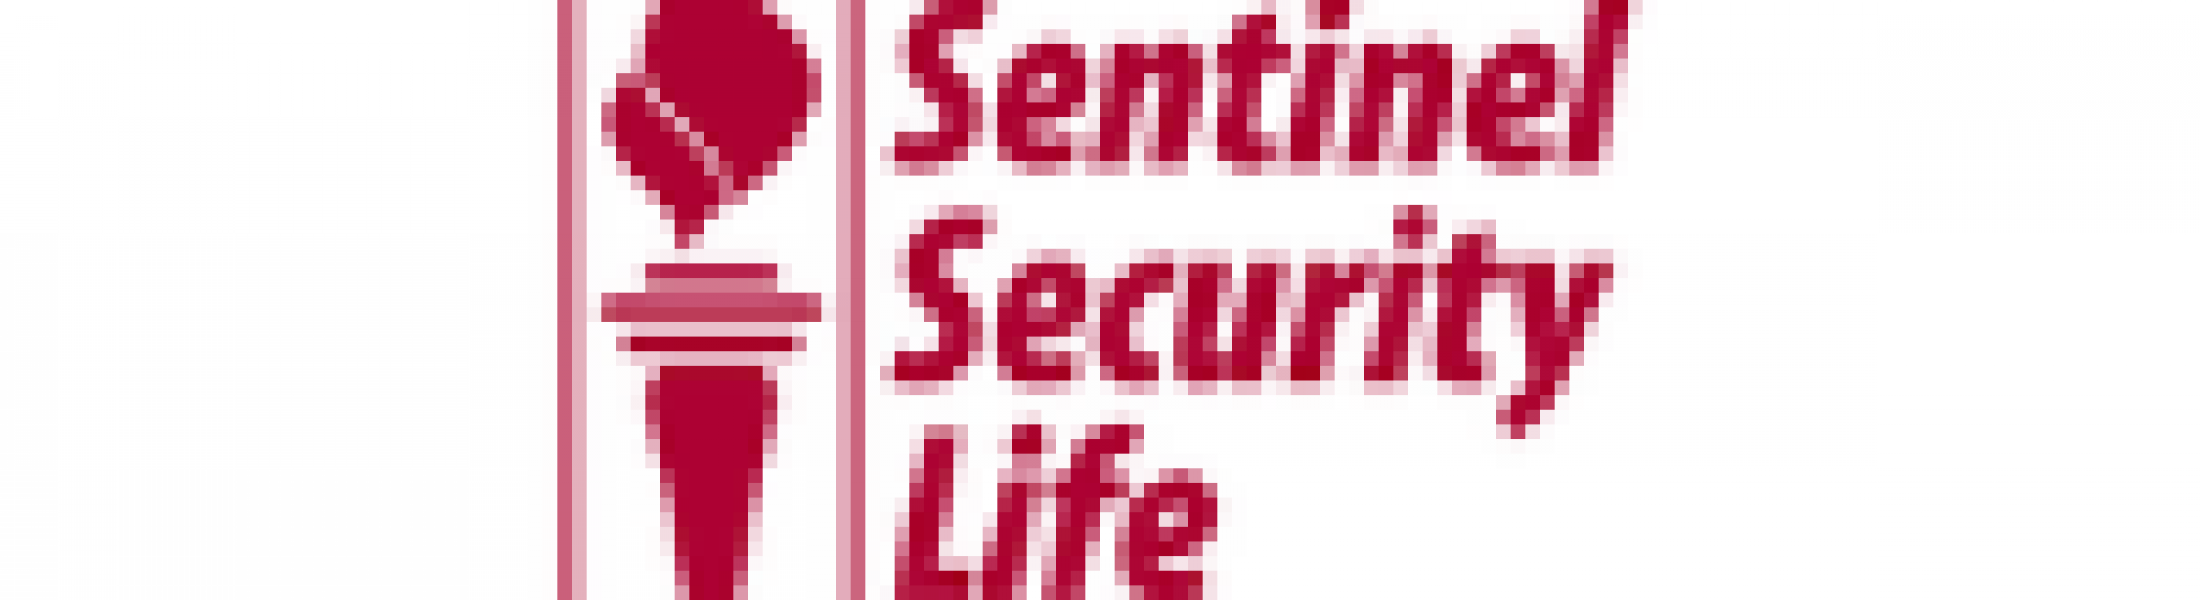 sentinel security life payer id